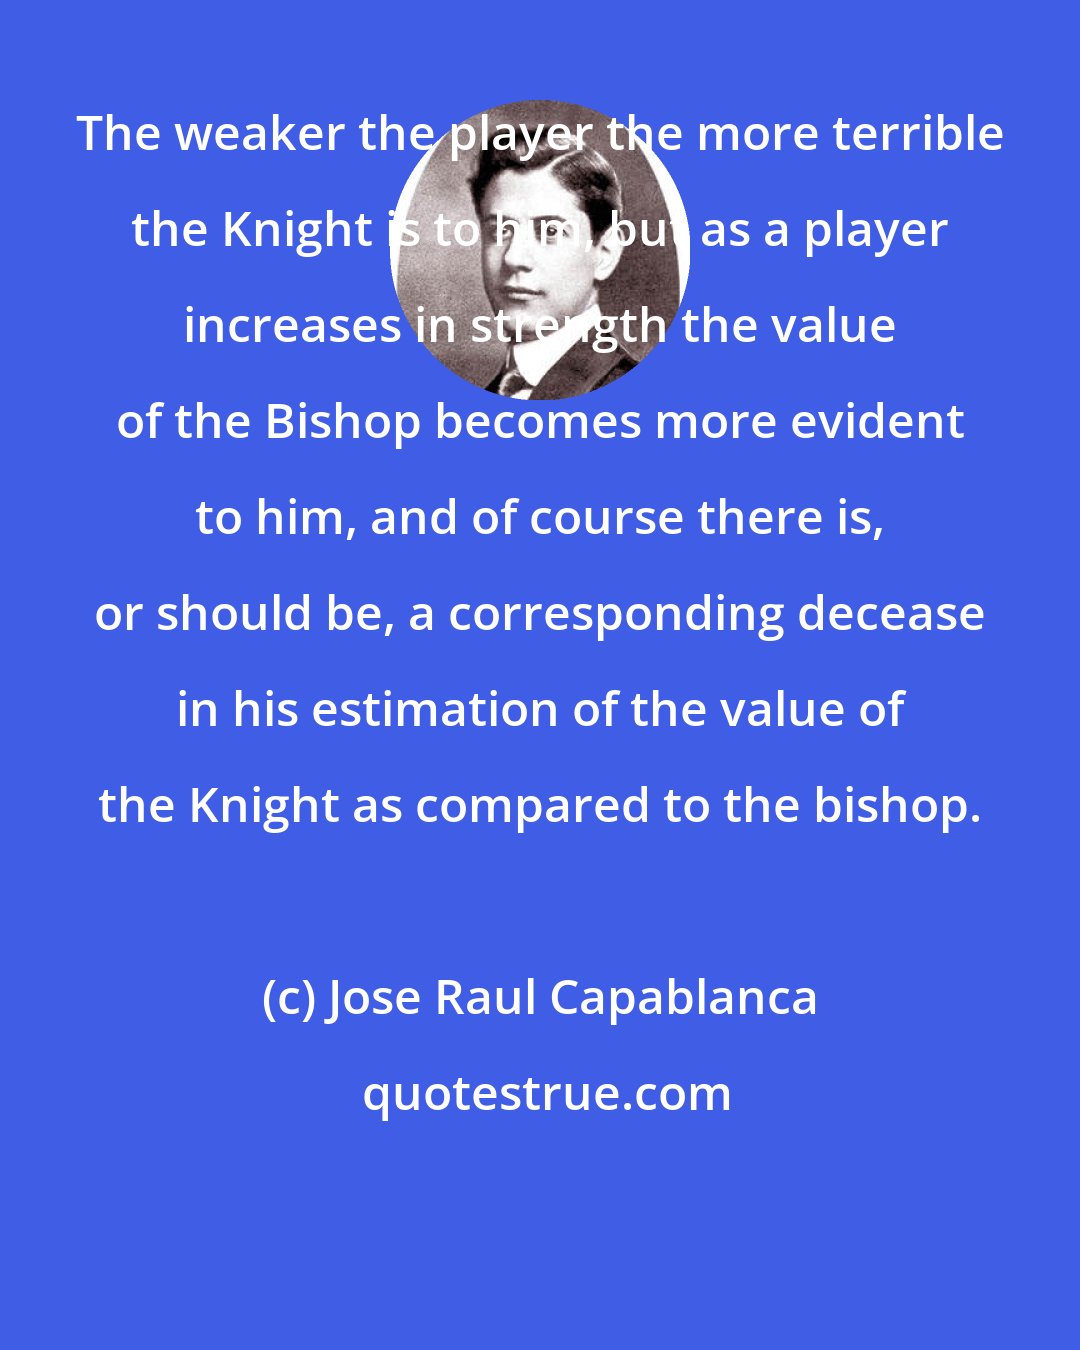 Jose Raul Capablanca: The weaker the player the more terrible the Knight is to him, but as a player increases in strength the value of the Bishop becomes more evident to him, and of course there is, or should be, a corresponding decease in his estimation of the value of the Knight as compared to the bishop.